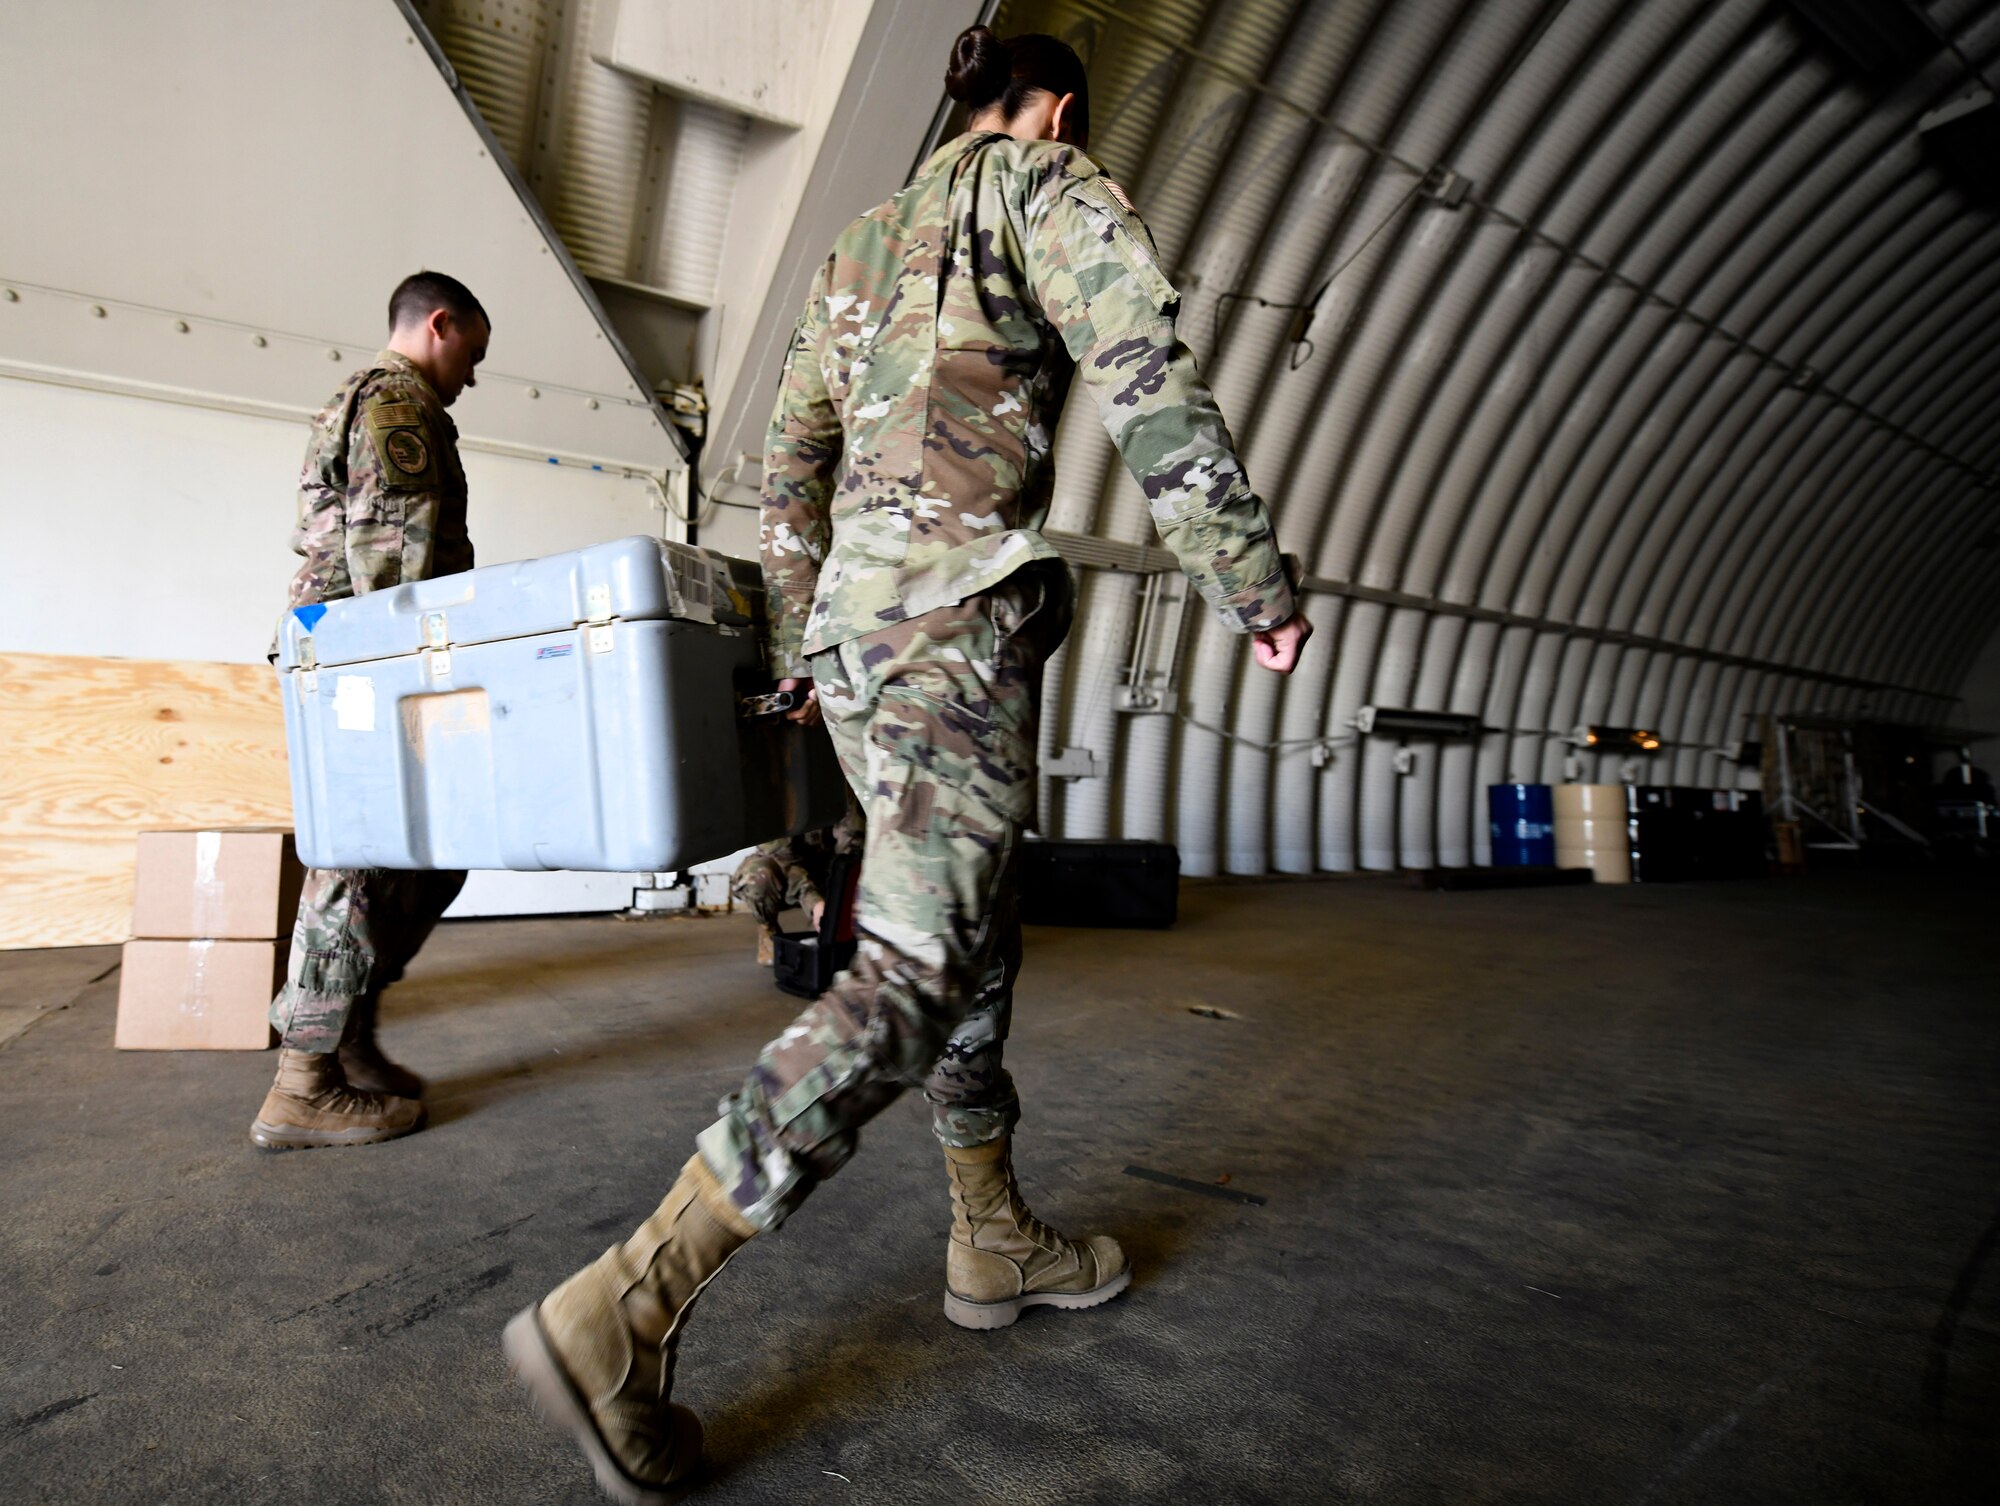 Tech. Sgt. Alicia Bertoch, 435th Air Expeditionary Wing surgeon general office flight chief, right, and Staff Sgt. Clayton Bessette, 435th AEW biomedical equipment technician, carry a case of bioenvironmental equipment at Ramstein Air Base, Germany, Sept. 22, 2020. In addition to supply and logistics, the SG team services all equipment and provides readiness capabilities for personnel deploying and redeploying to Africa. (U.S. Air Force photo by Senior Airman Madeline Herzog)